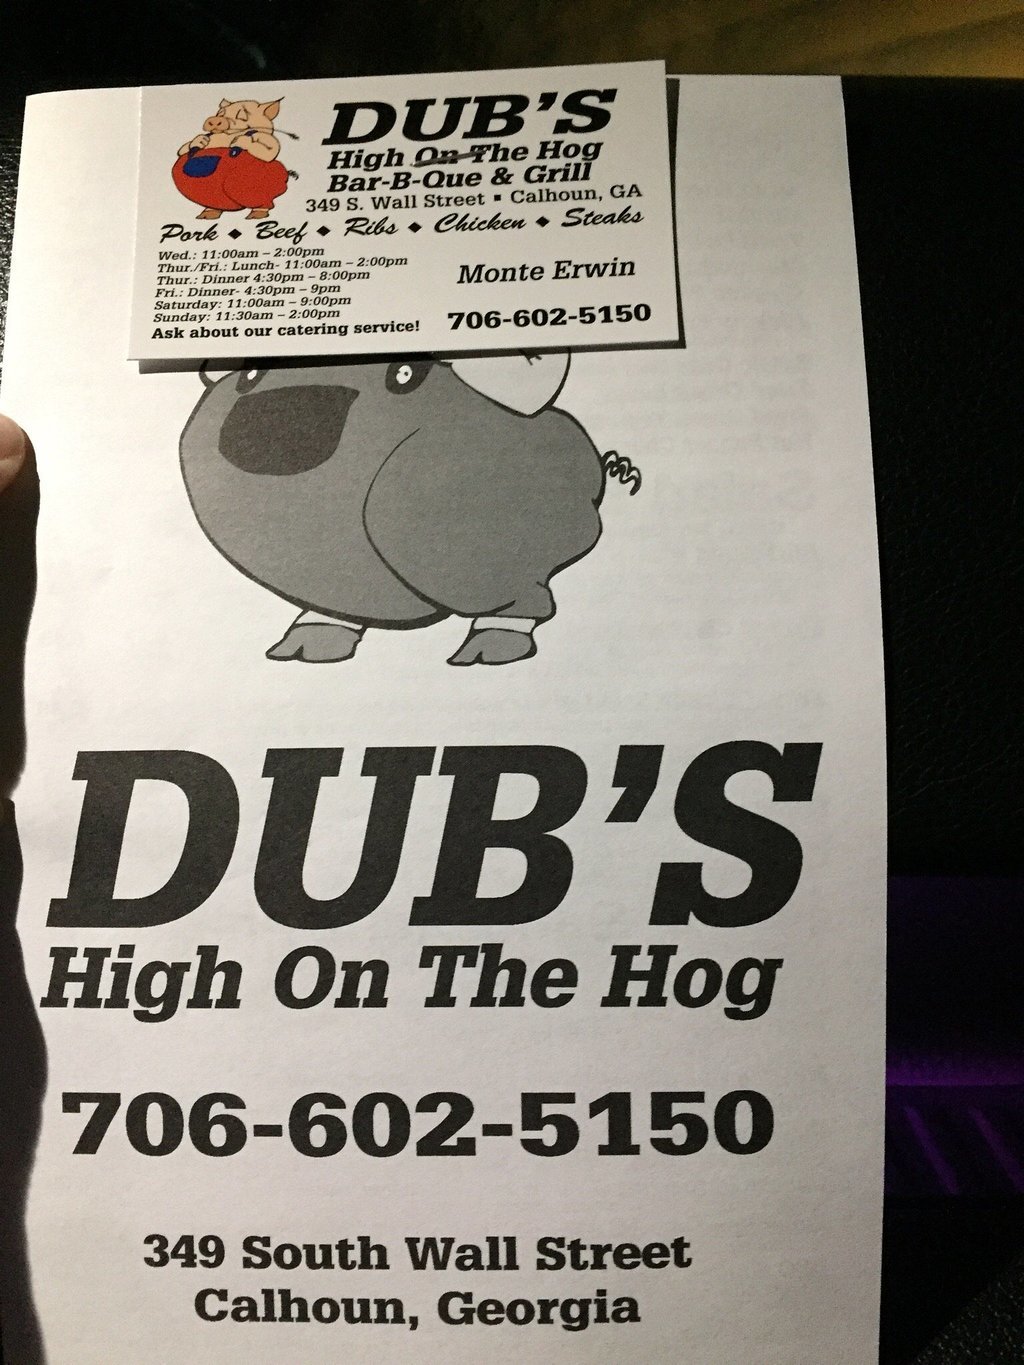 Dub's High on the Hog BBQ and Grill